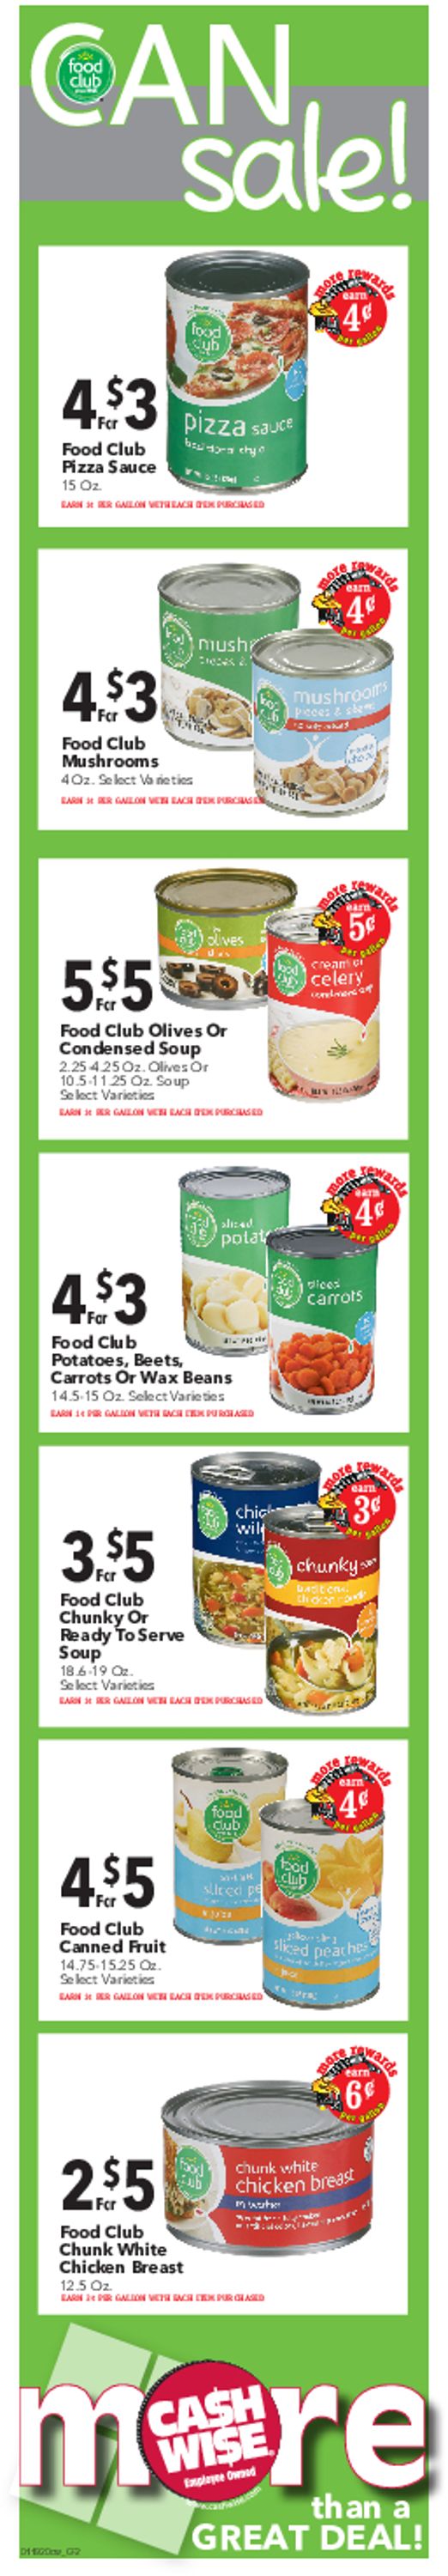 Cash Wise Weekly Ad Circular - valid 01/22-01/28/2020 (Page 6)